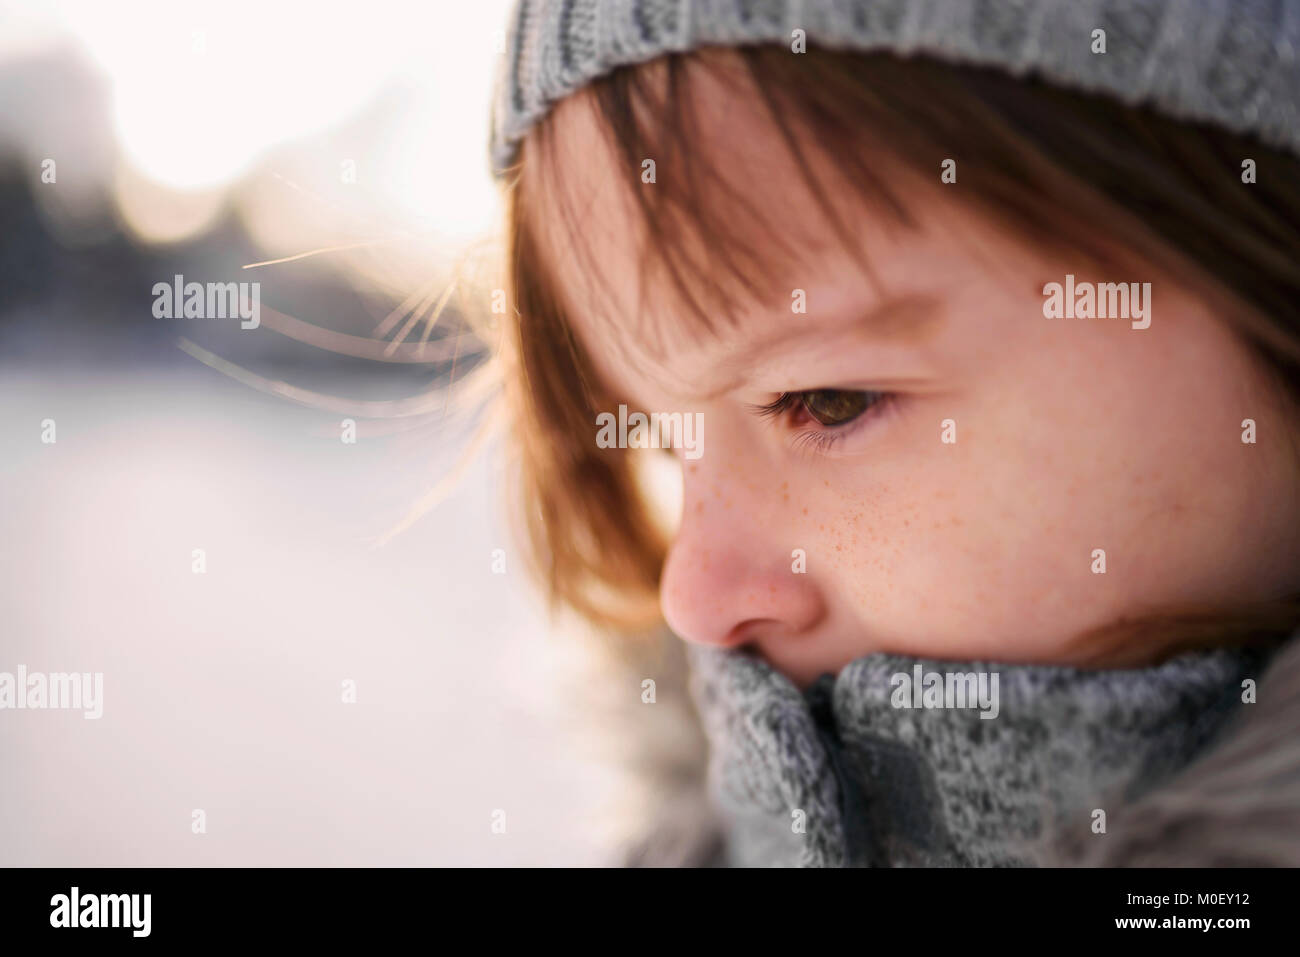 Close-up portrait of a girl outside wearing warm clothing Stock Photo